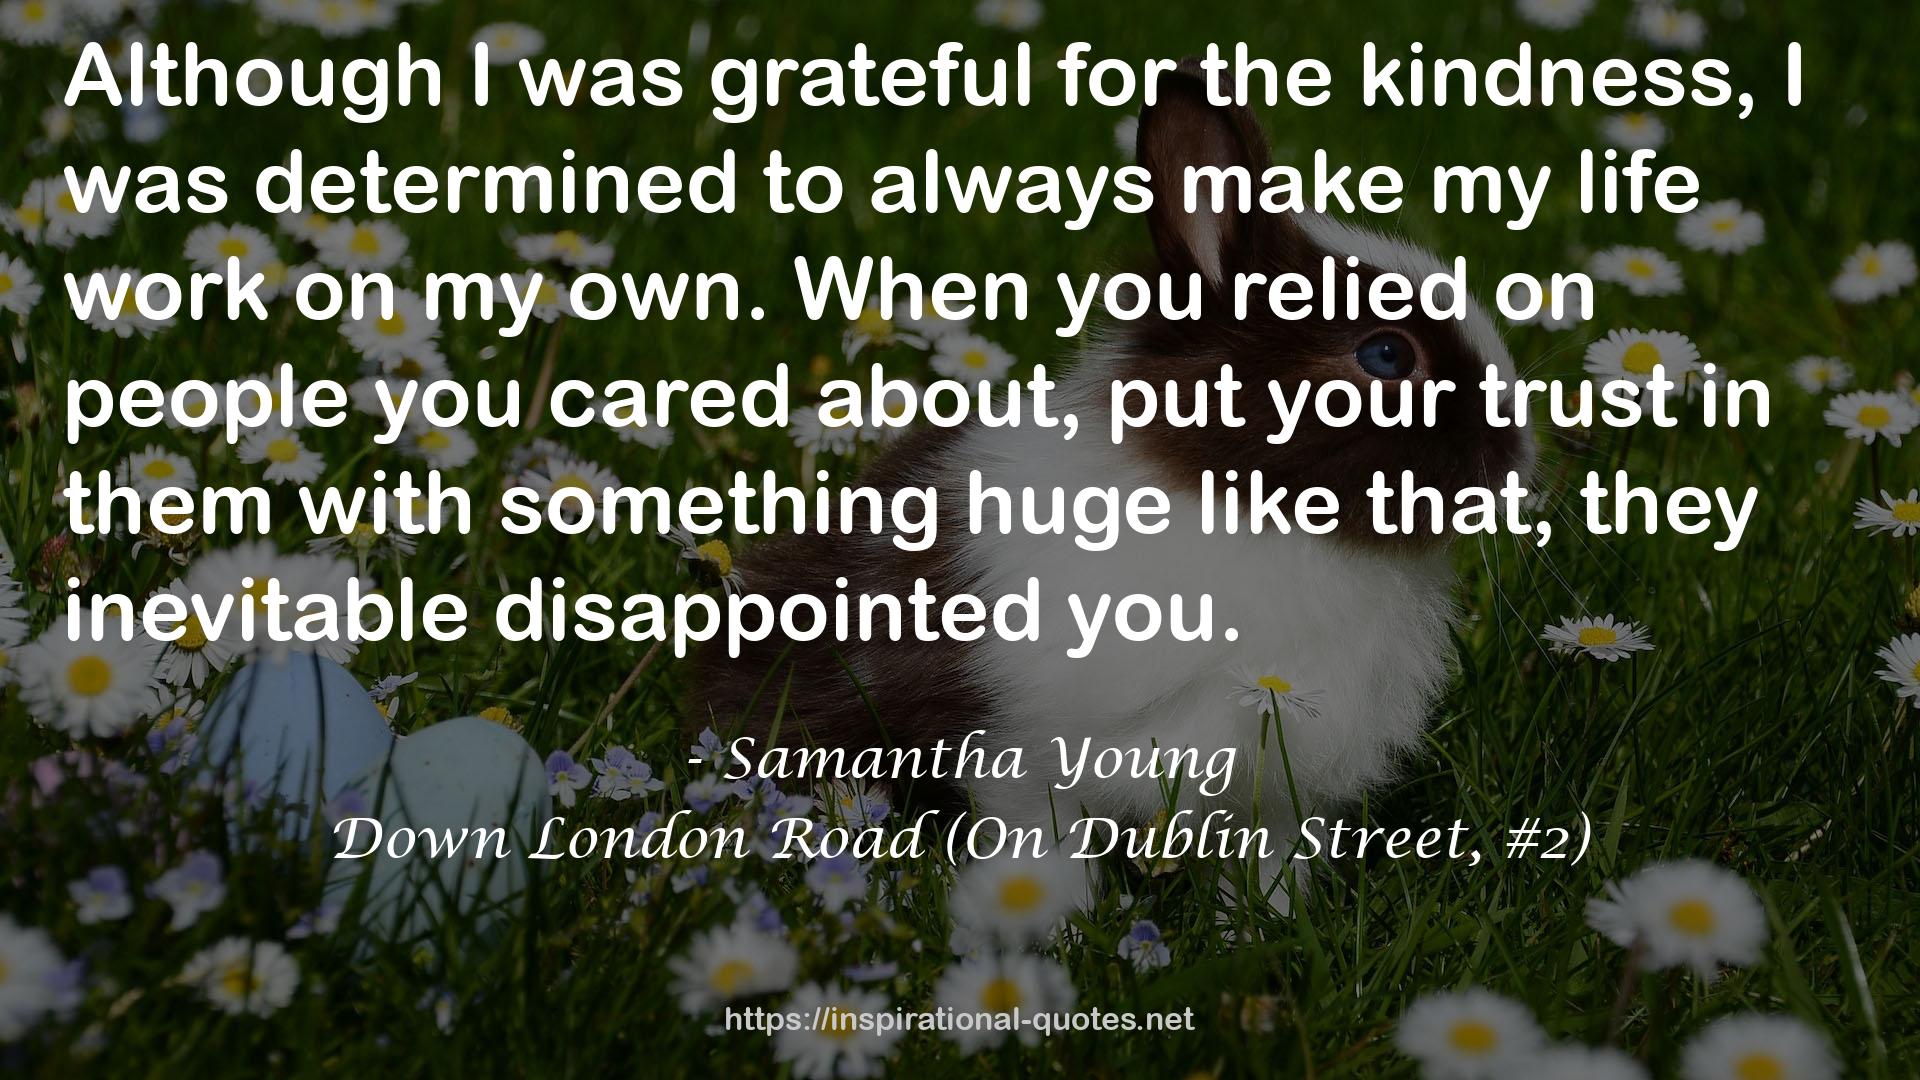 Down London Road (On Dublin Street, #2) QUOTES